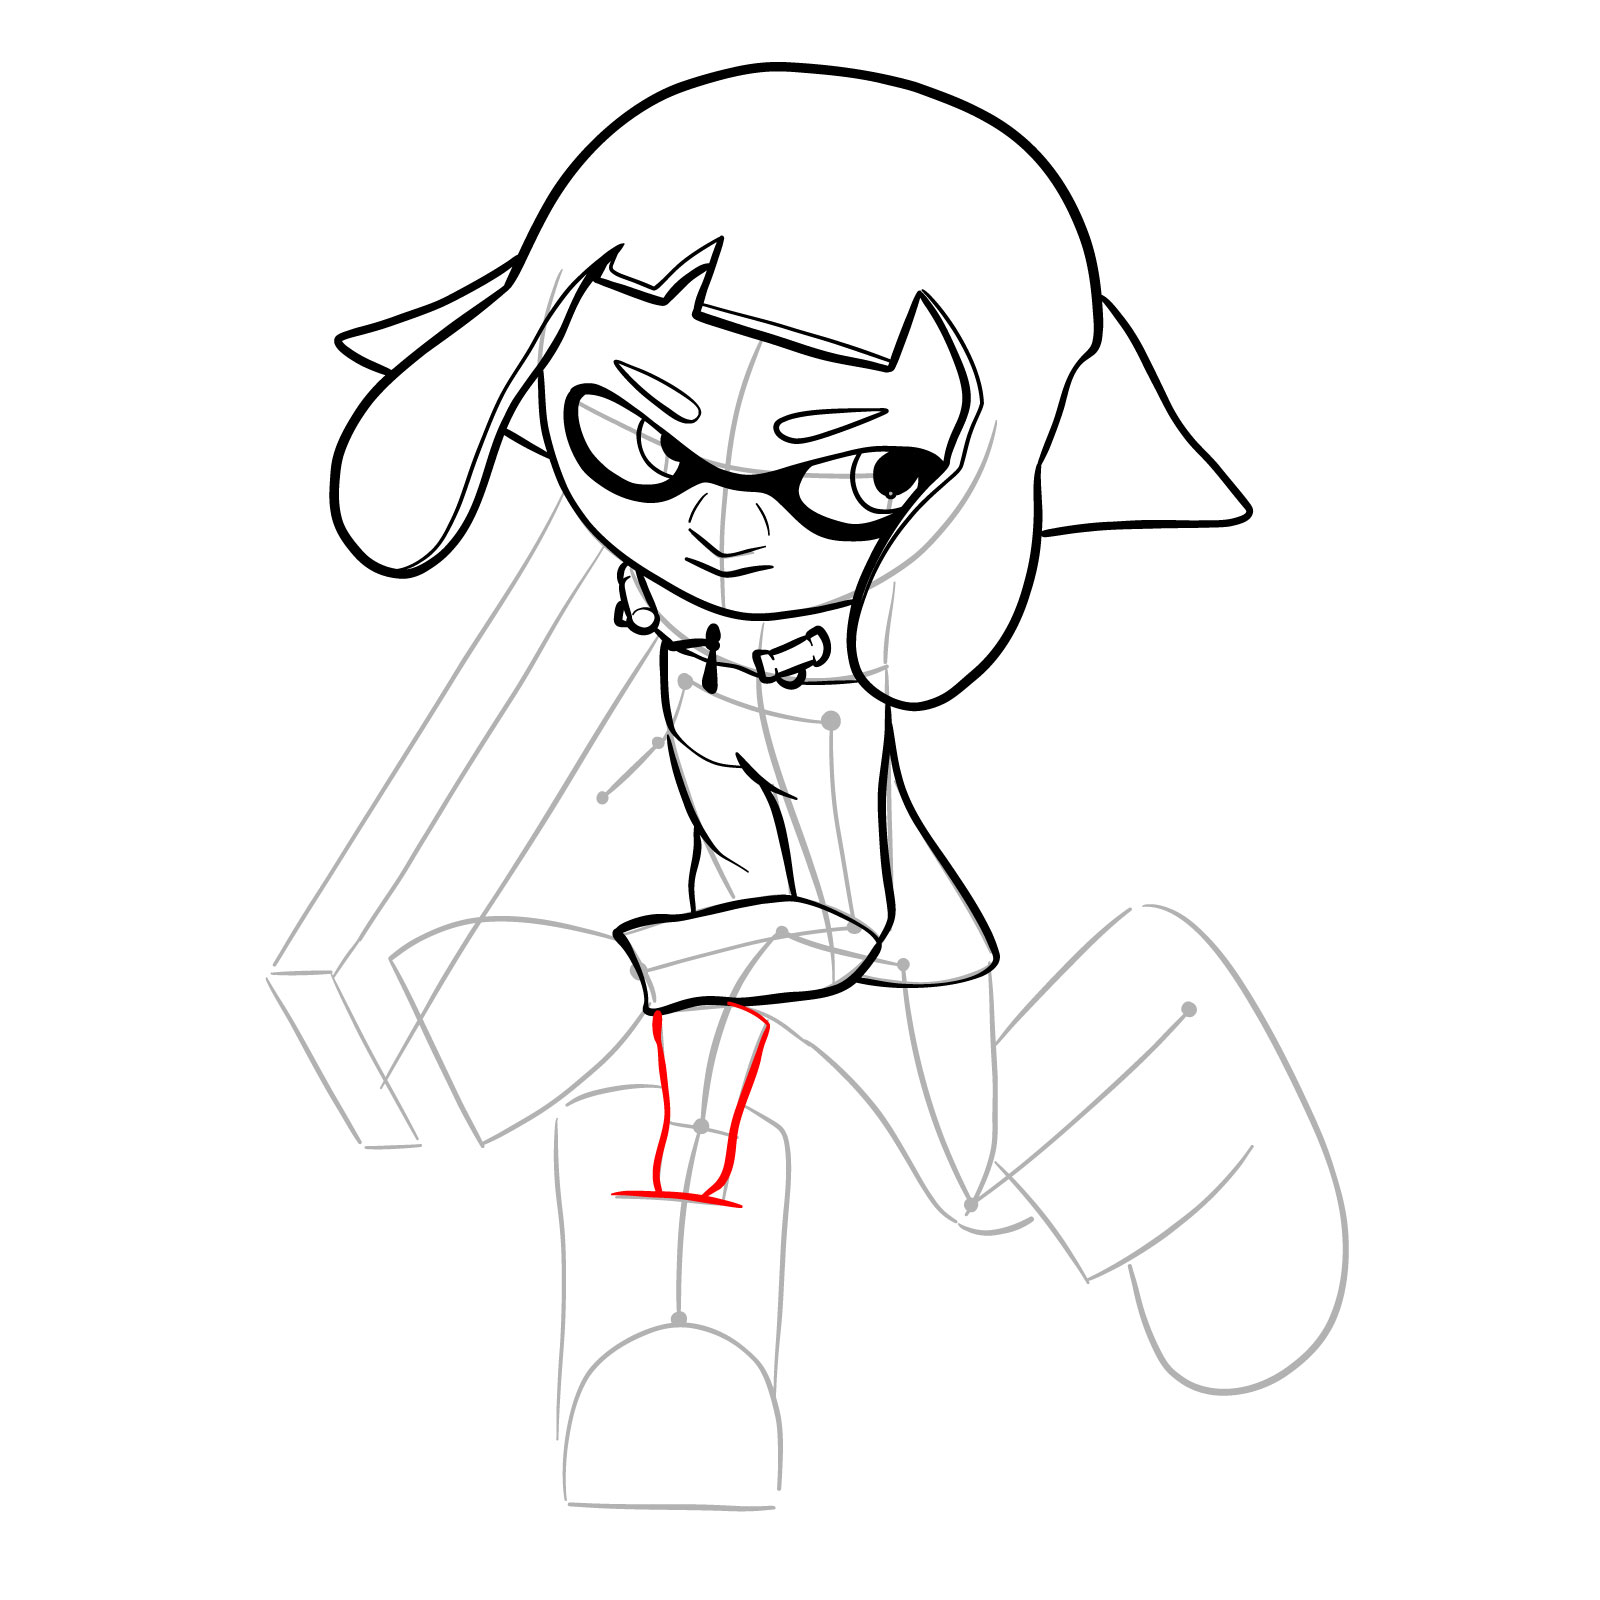 How to draw a Splatoon Agent 4 - step 16